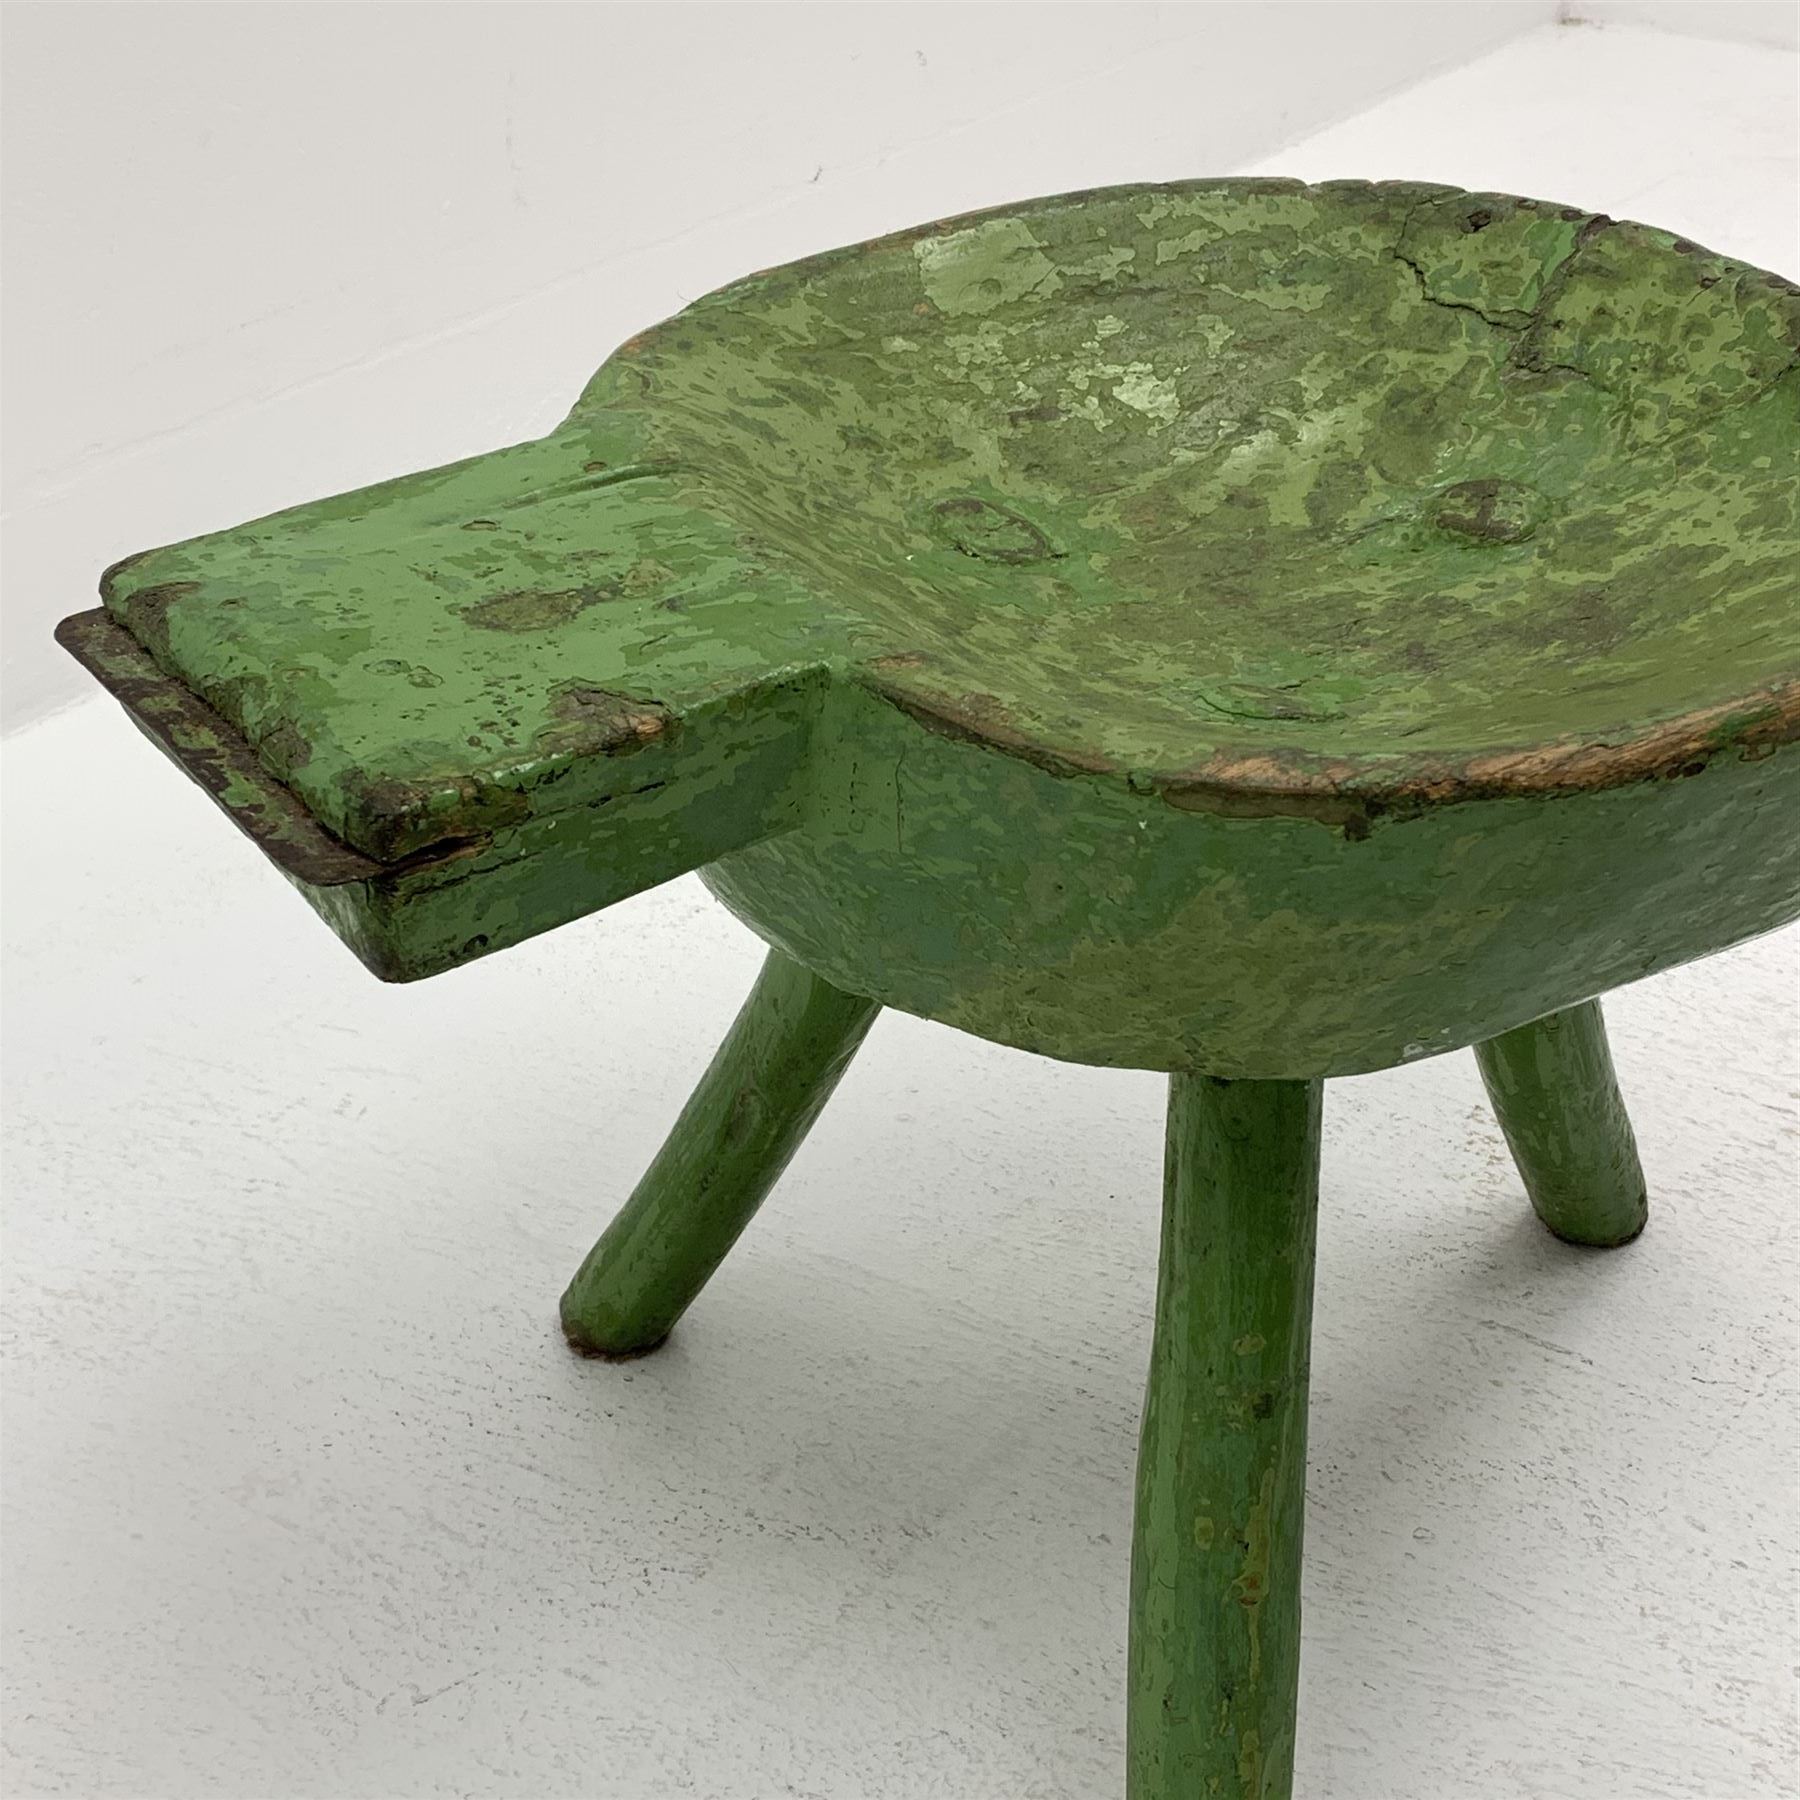 18th/19th century vernacular primitive green painted stool with dished seat fitted with metal scrape - Image 3 of 3